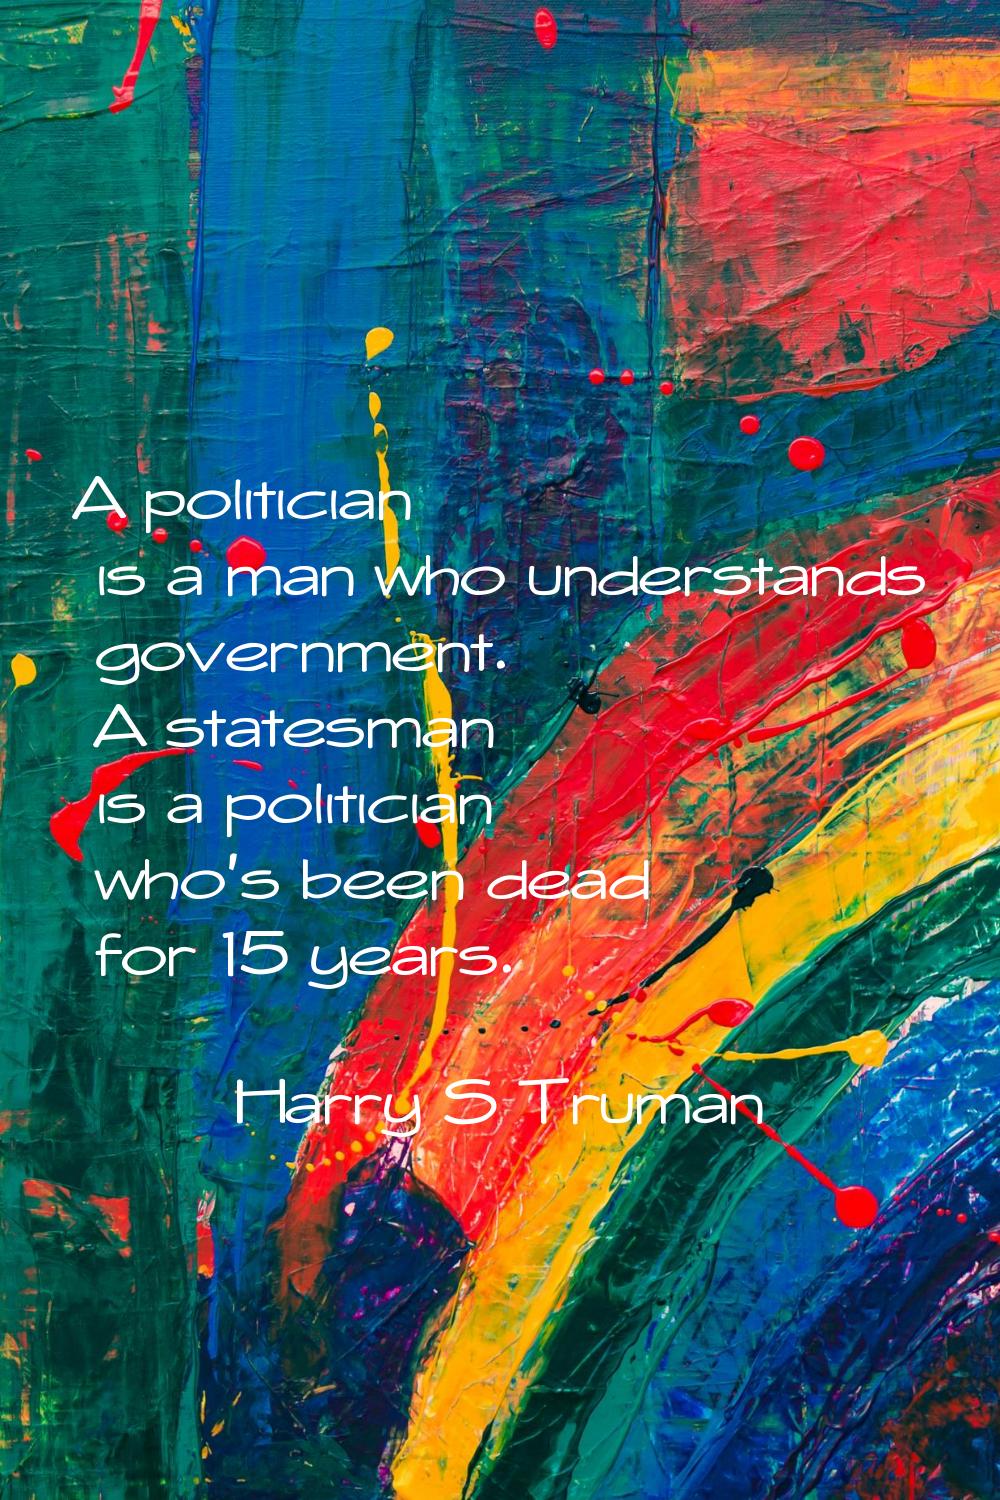 A politician is a man who understands government. A statesman is a politician who's been dead for 1